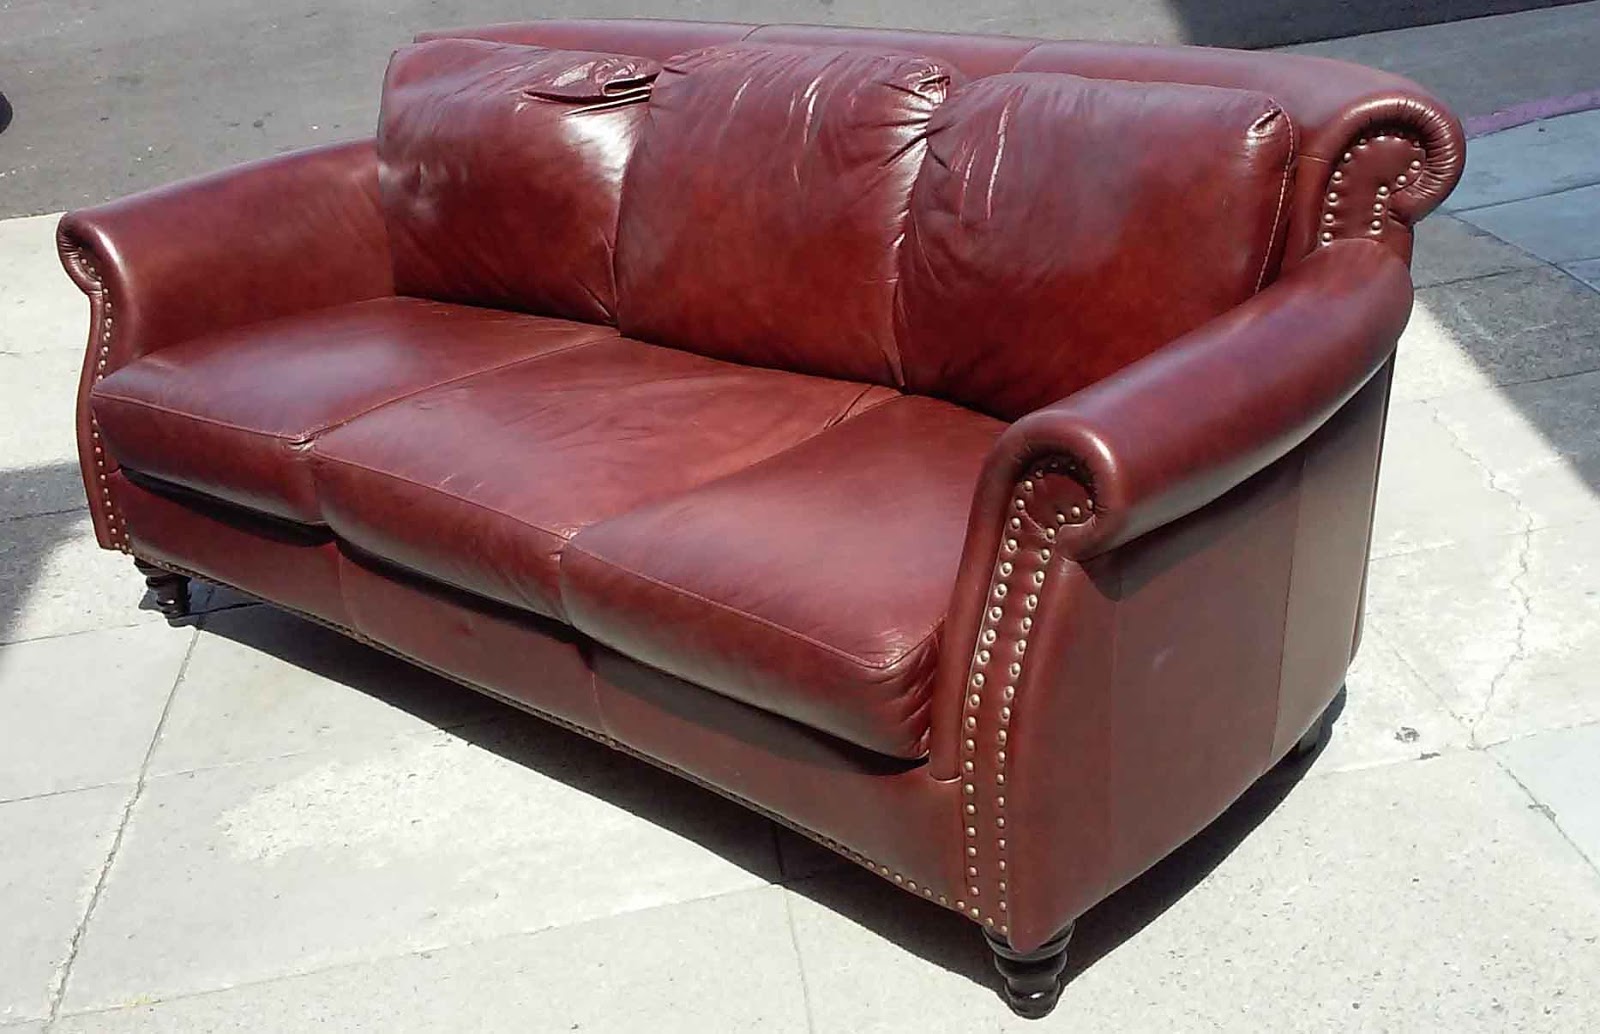 Find 55+ Inspiring burgundy leather sofa mid century Not To Be Missed